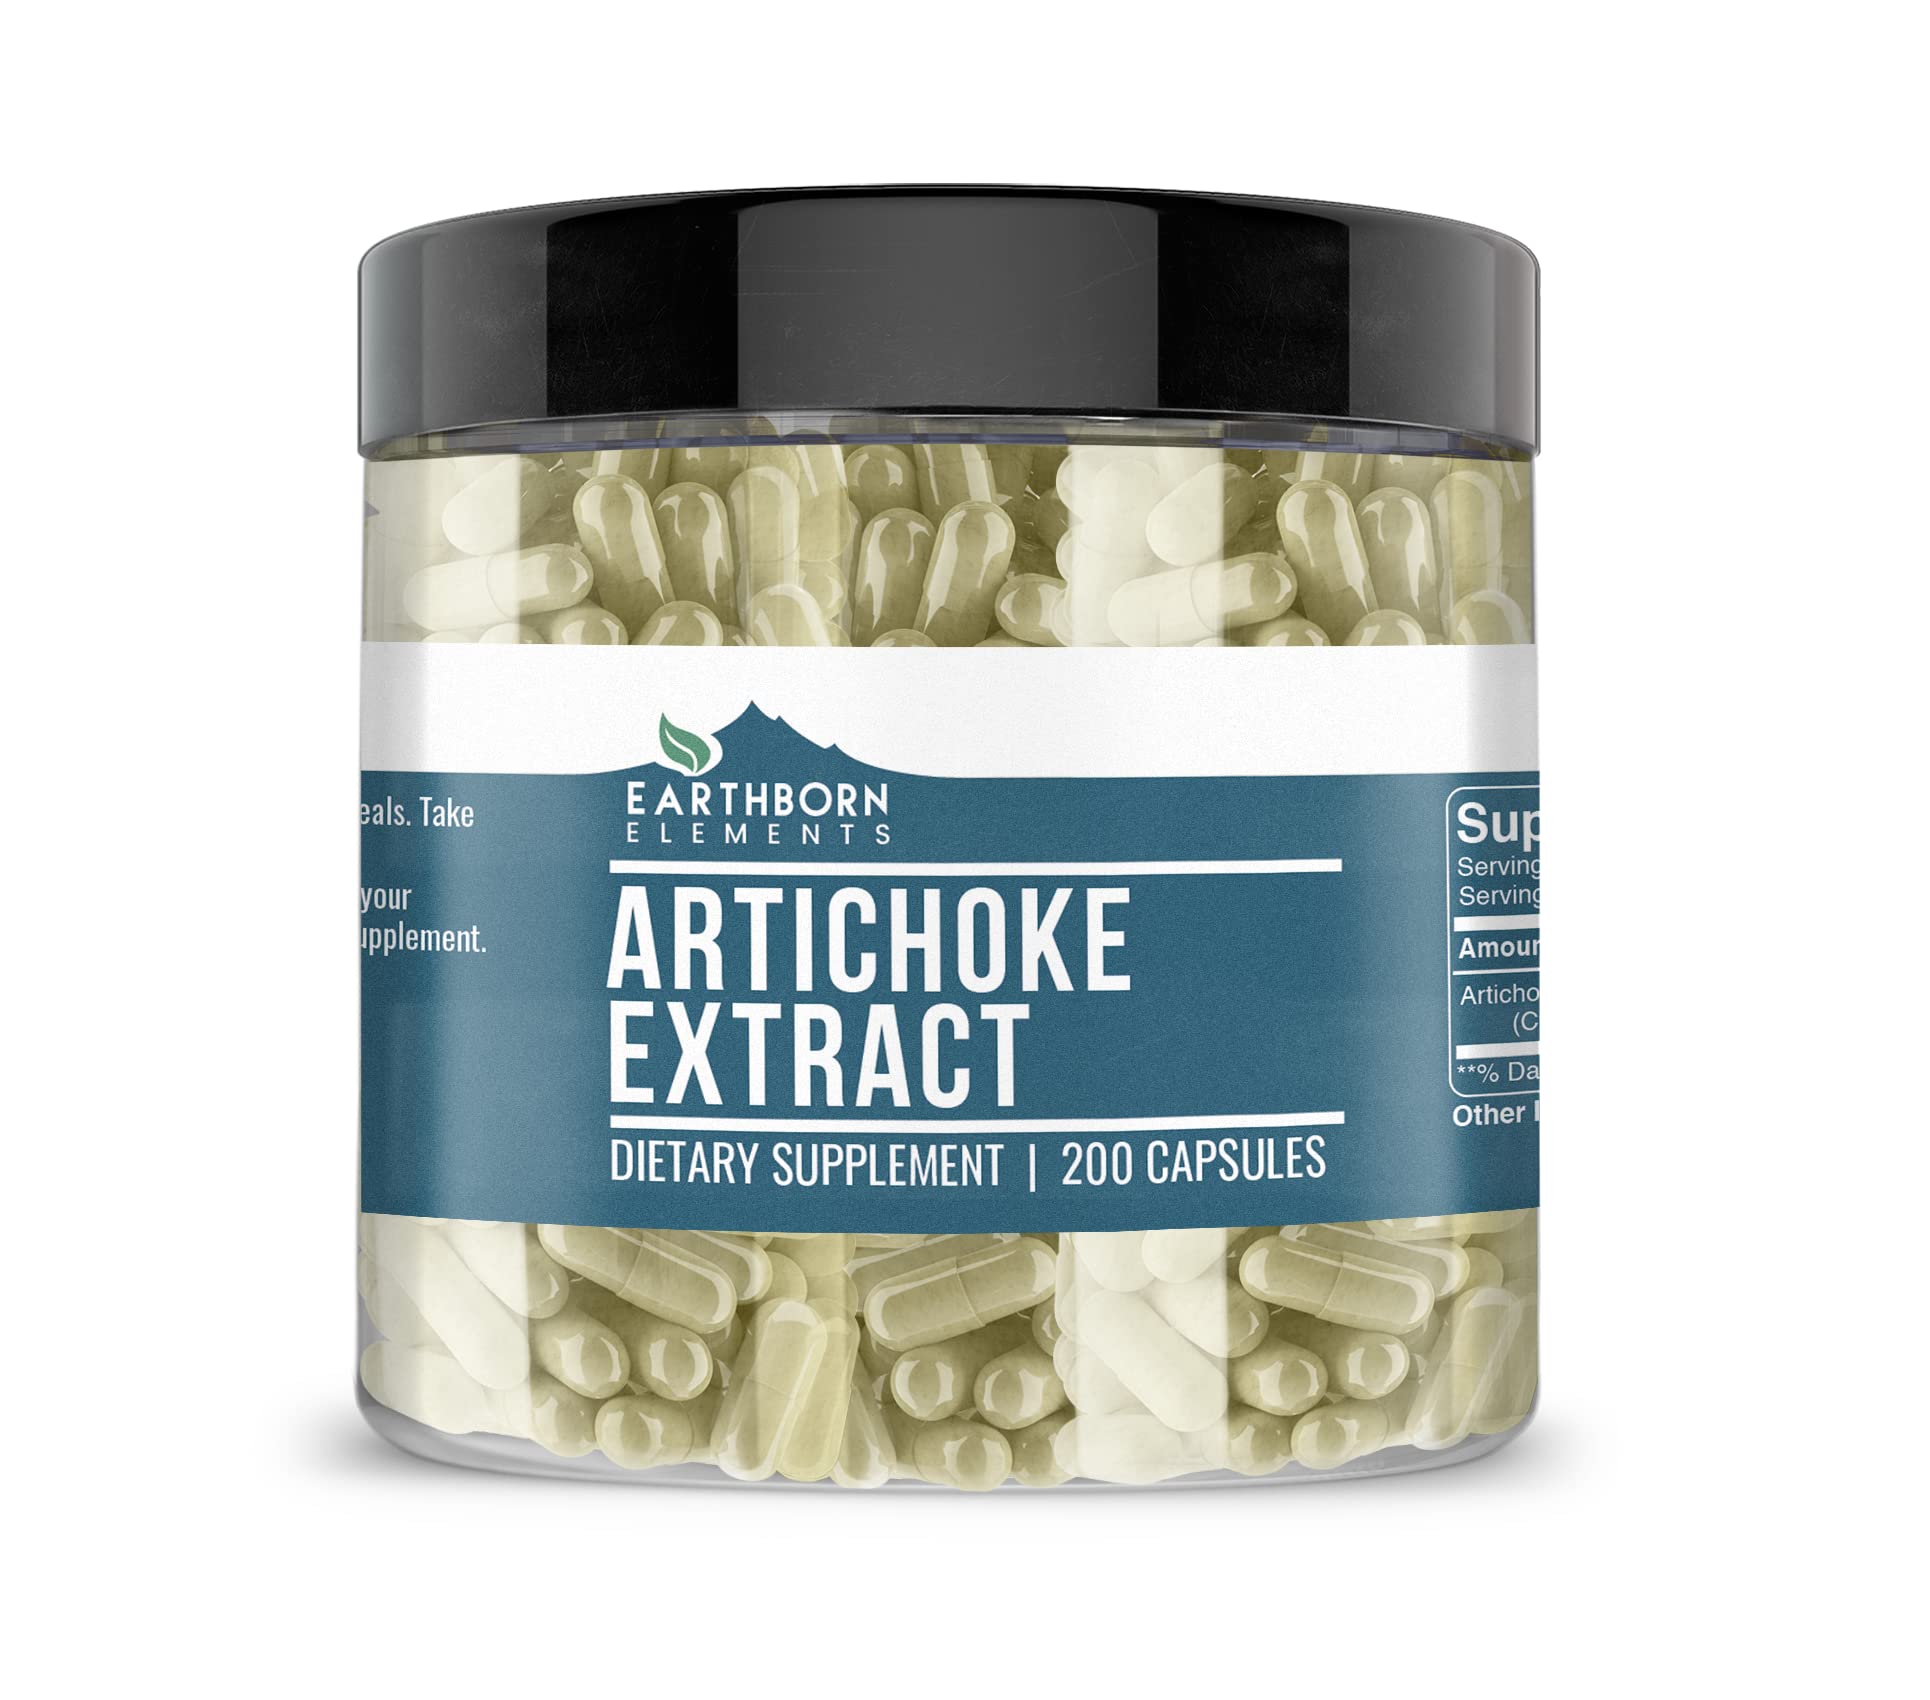 Earthborn Elements Artichoke Extract 200 Capsules, Pure & Undiluted, No Additives